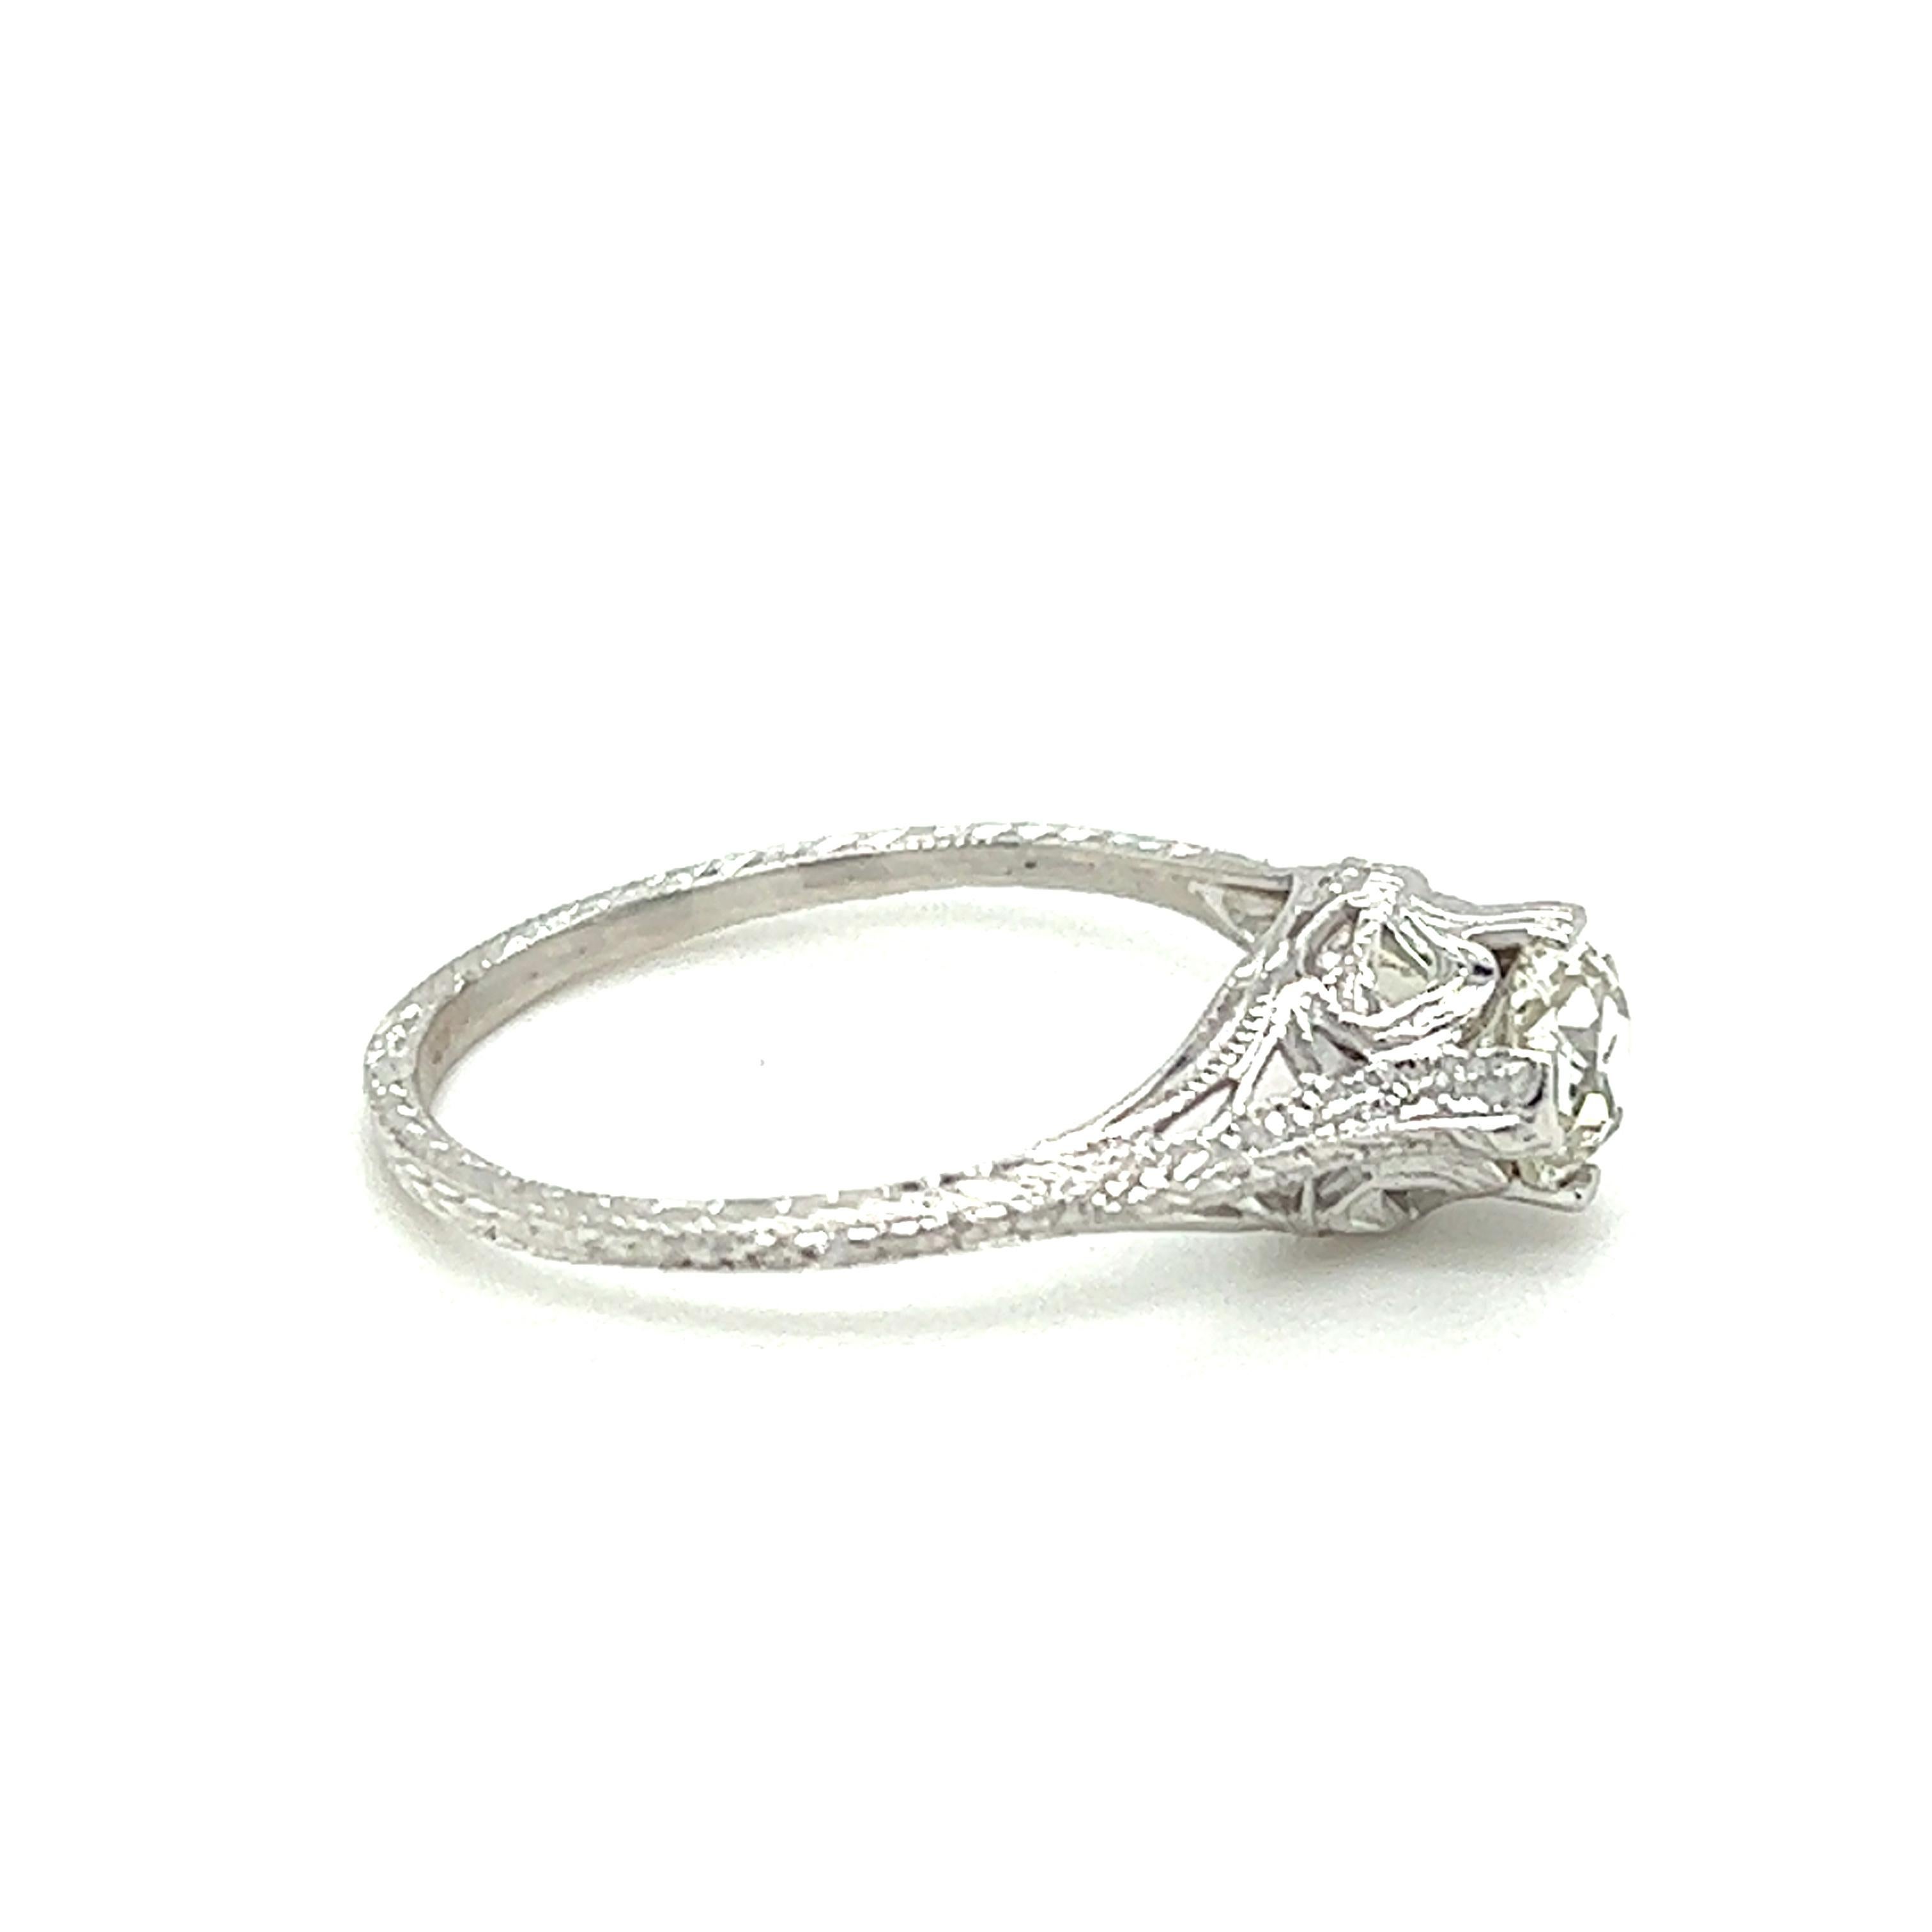 Art Deco 0.57 Ct Antique Cushion Cut Diamond Engagement Ring in 18k White Gold In Good Condition For Sale In Towson, MD